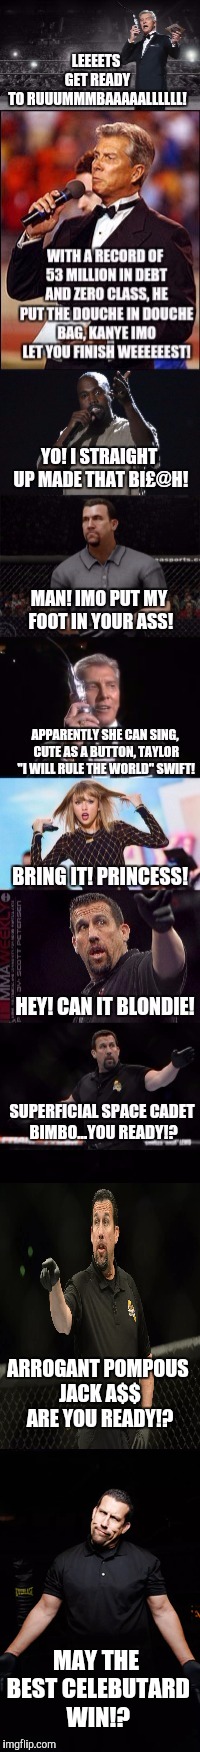 I love it when Celebutards fight. It's like watching a train wreck. Next up Trump versus The Pope. | ARROGANT POMPOUS JACK A$$ ARE YOU READY!? MAY THE BEST CELEBUTARD WIN!? | image tagged in kanye west,taylor swift,memes,funny,ufc | made w/ Imgflip meme maker